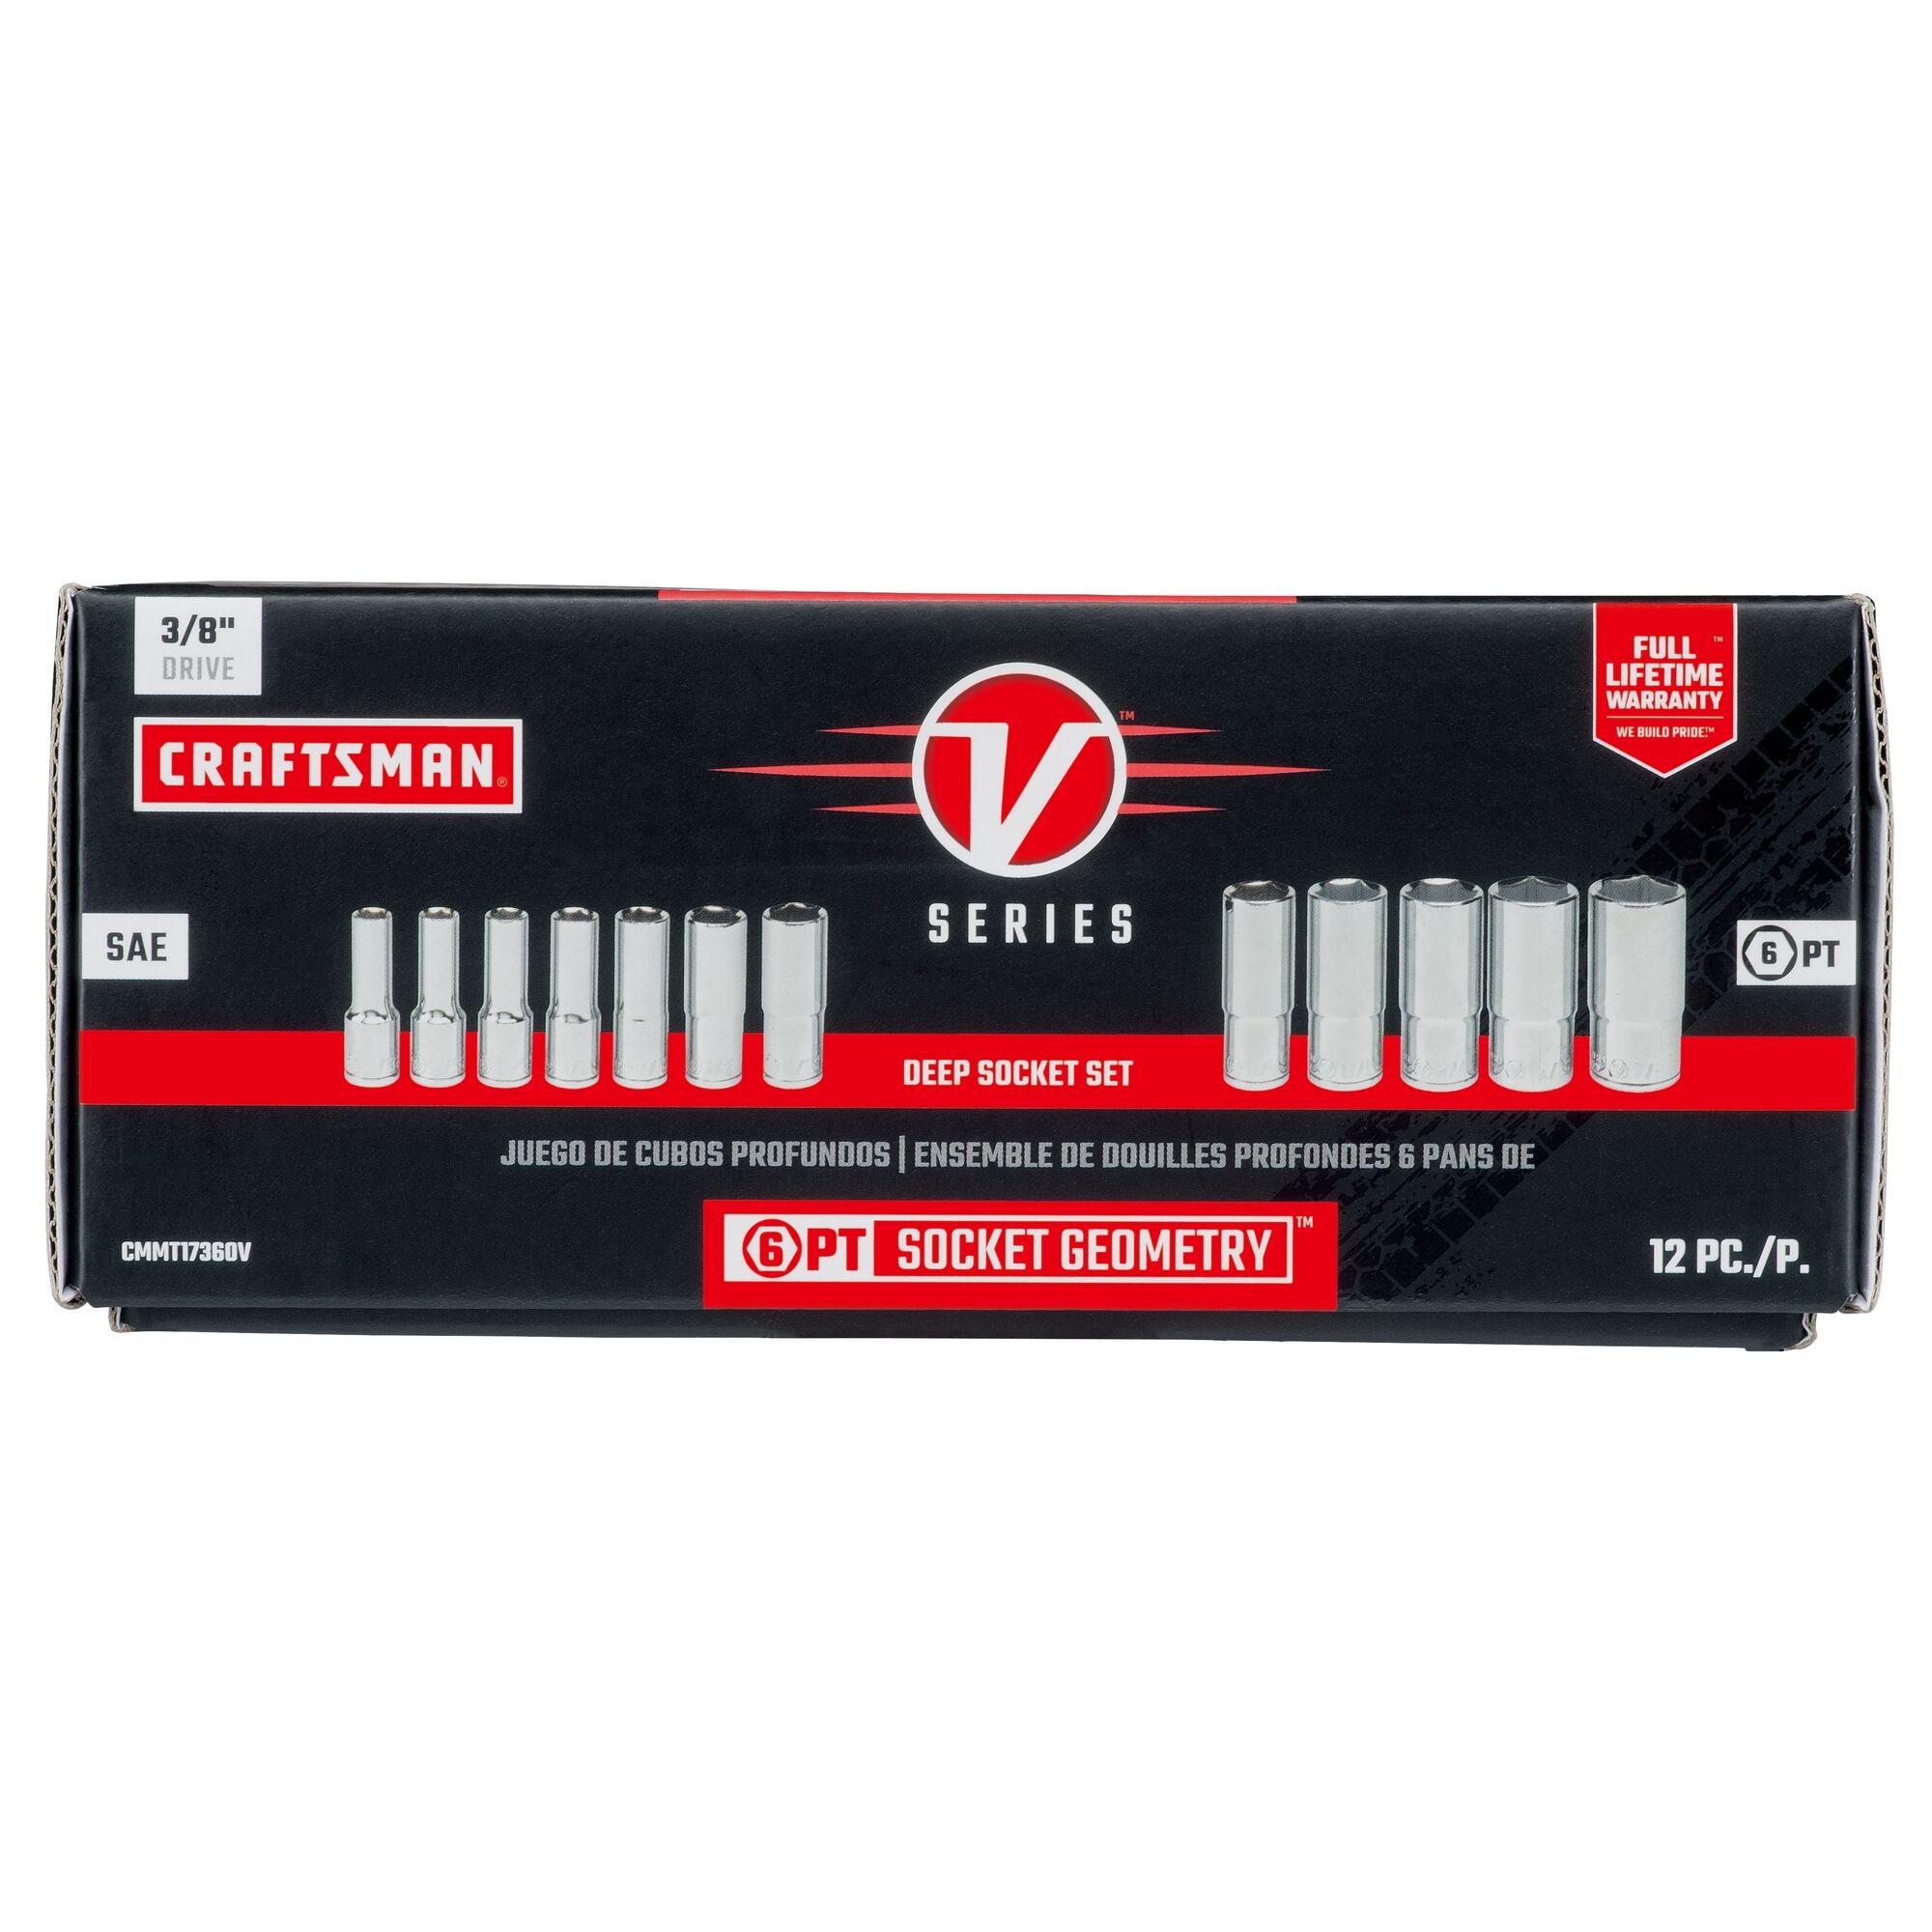 3 eighths inch drive S A E deep 6 point socket set 12 piece in cardboard packaging.